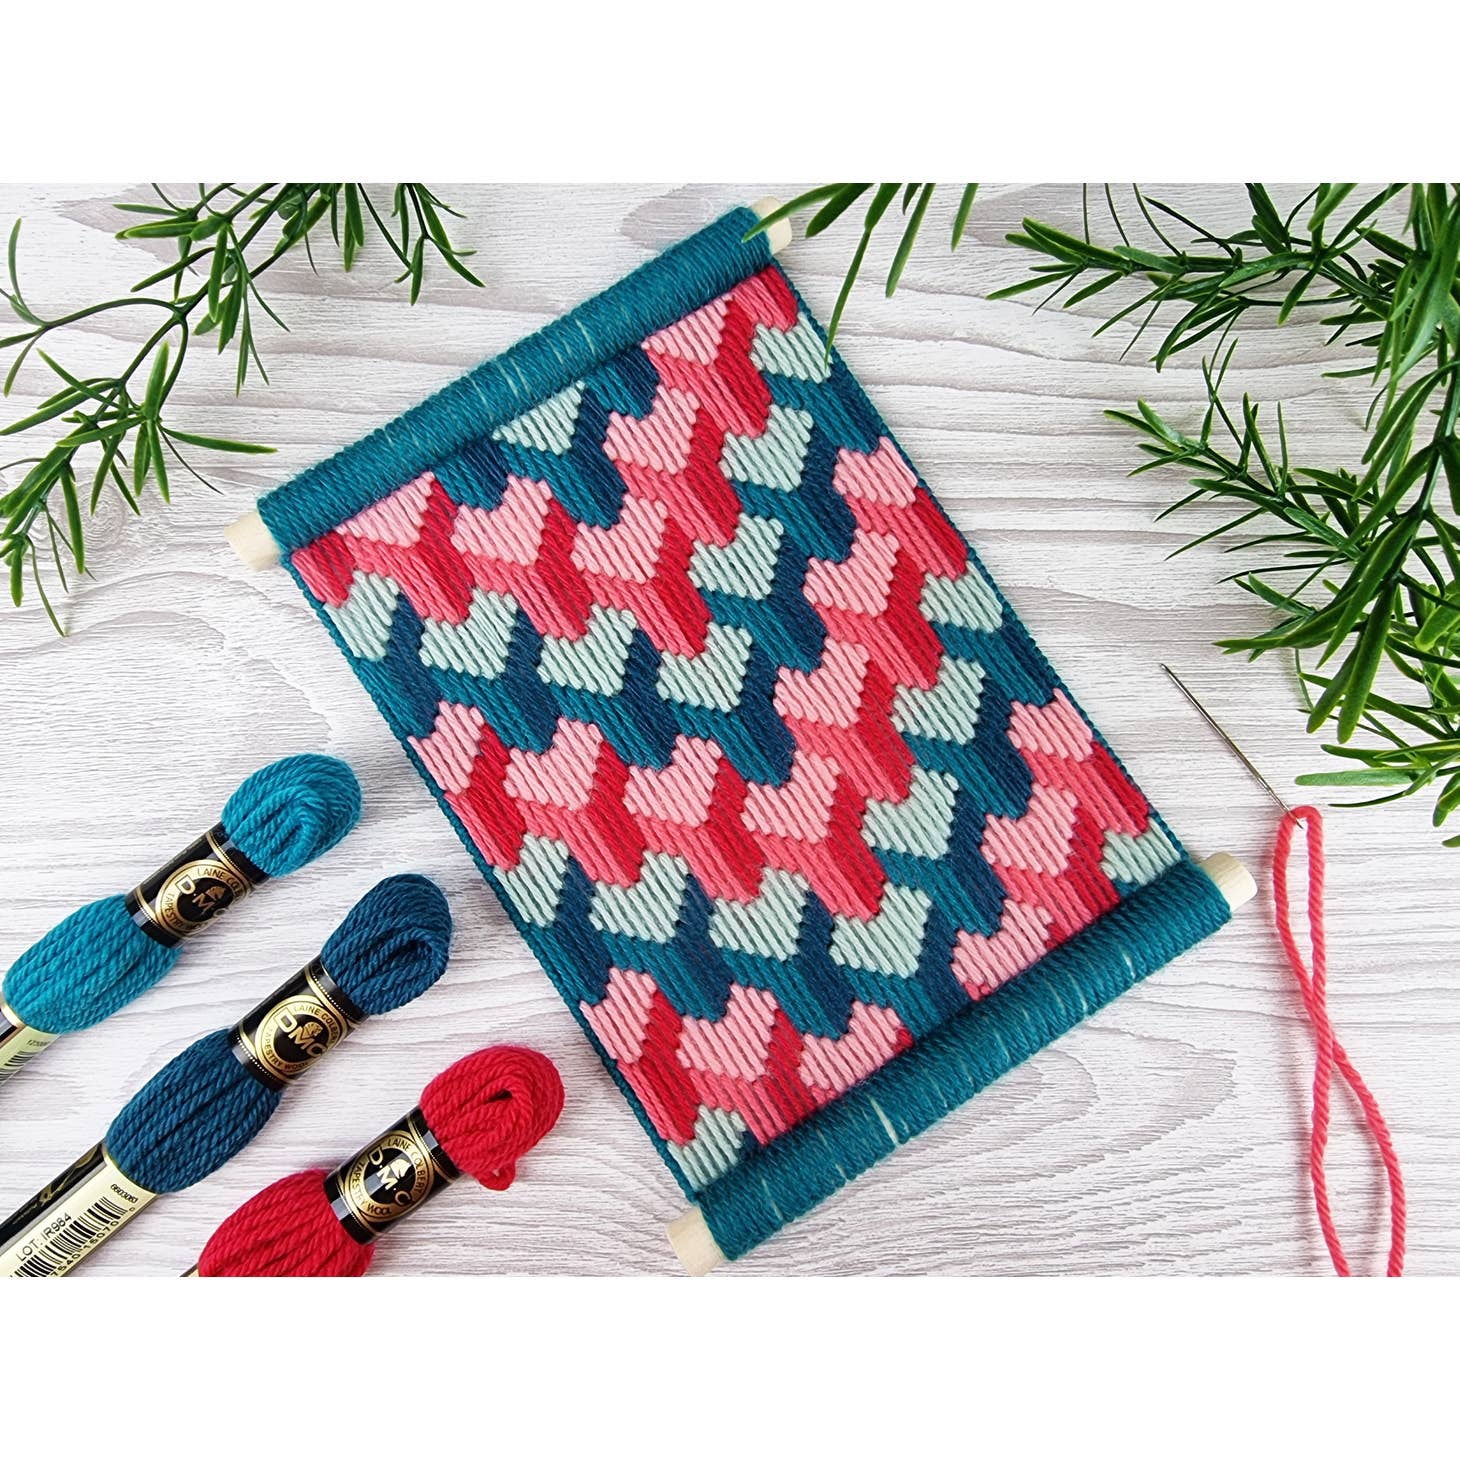 Bargello Tapestry Wall Hanging Kit By Suzie Jules  Bargello patterns,  Needlepoint patterns, Tapestry kits